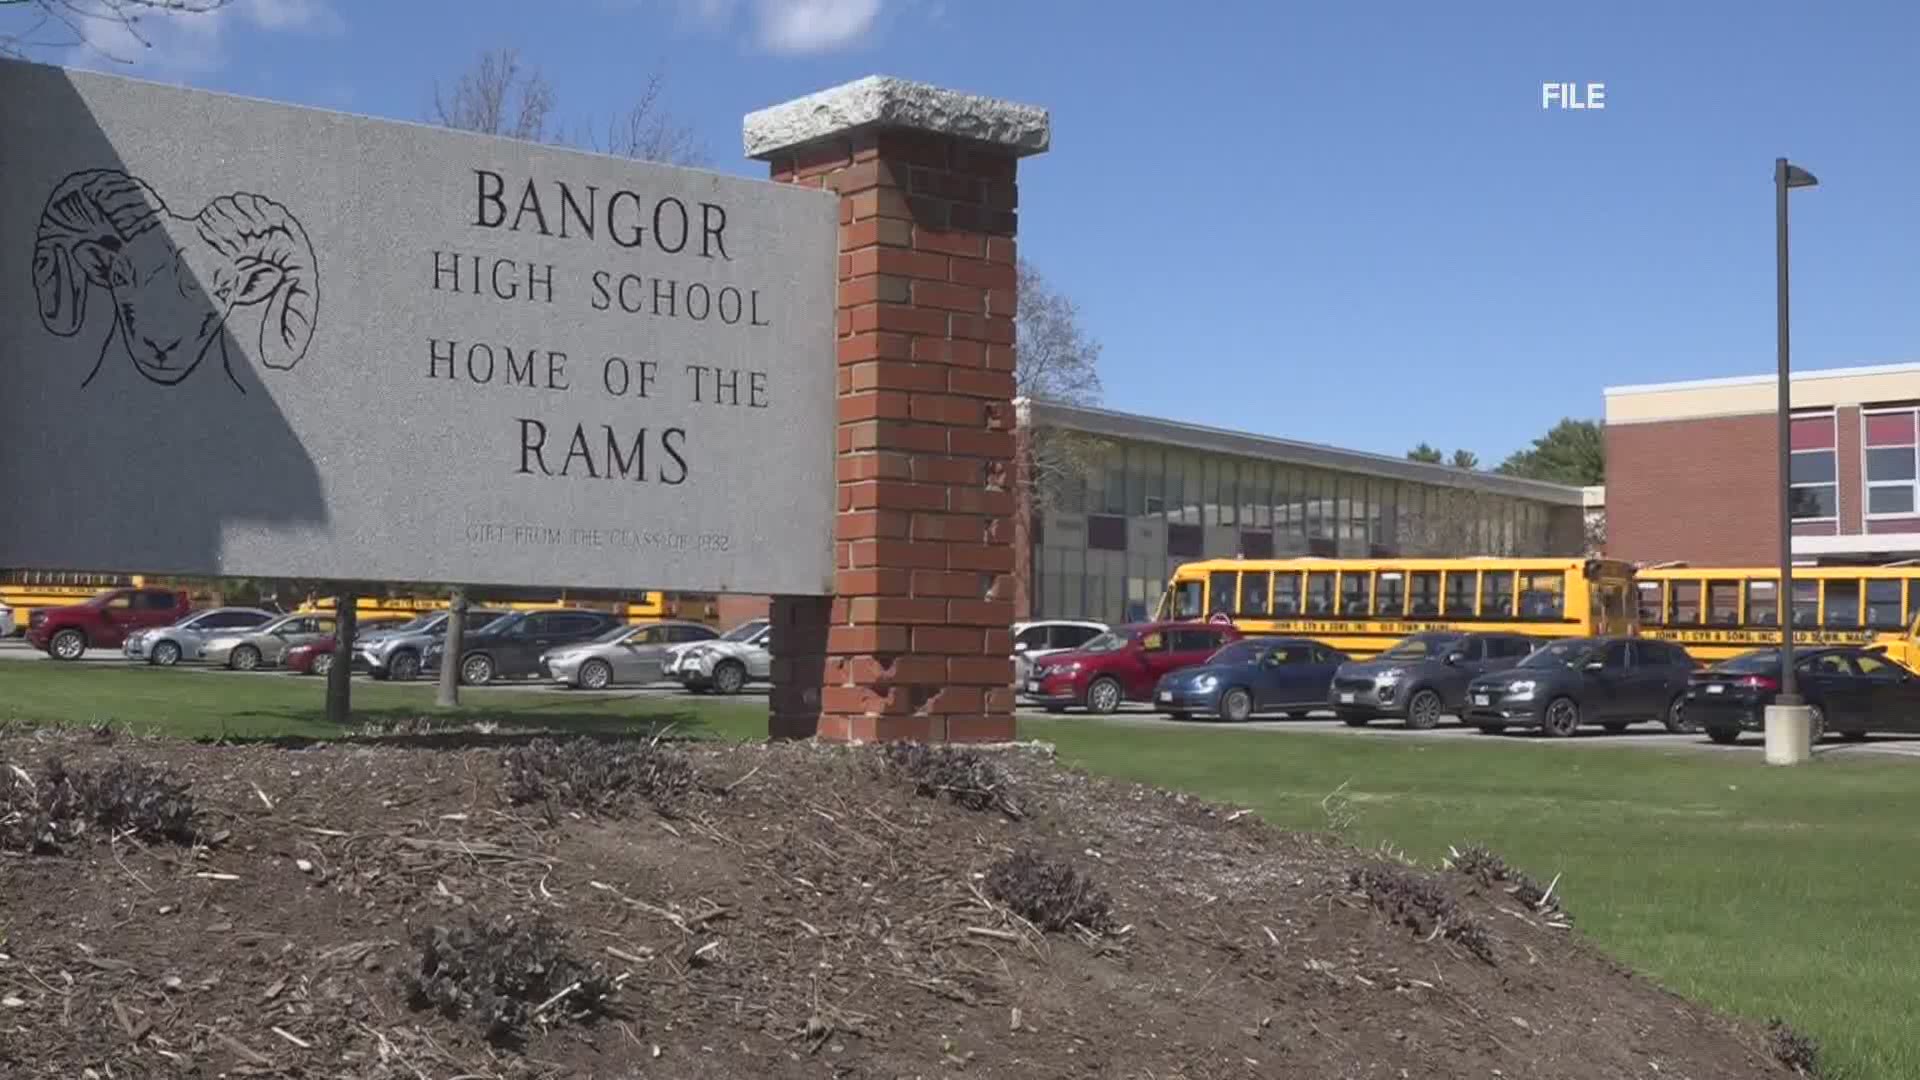 The Bangor Police Department said there was "no actual danger towards any student or faculty member," and the student in question is being cooperative.